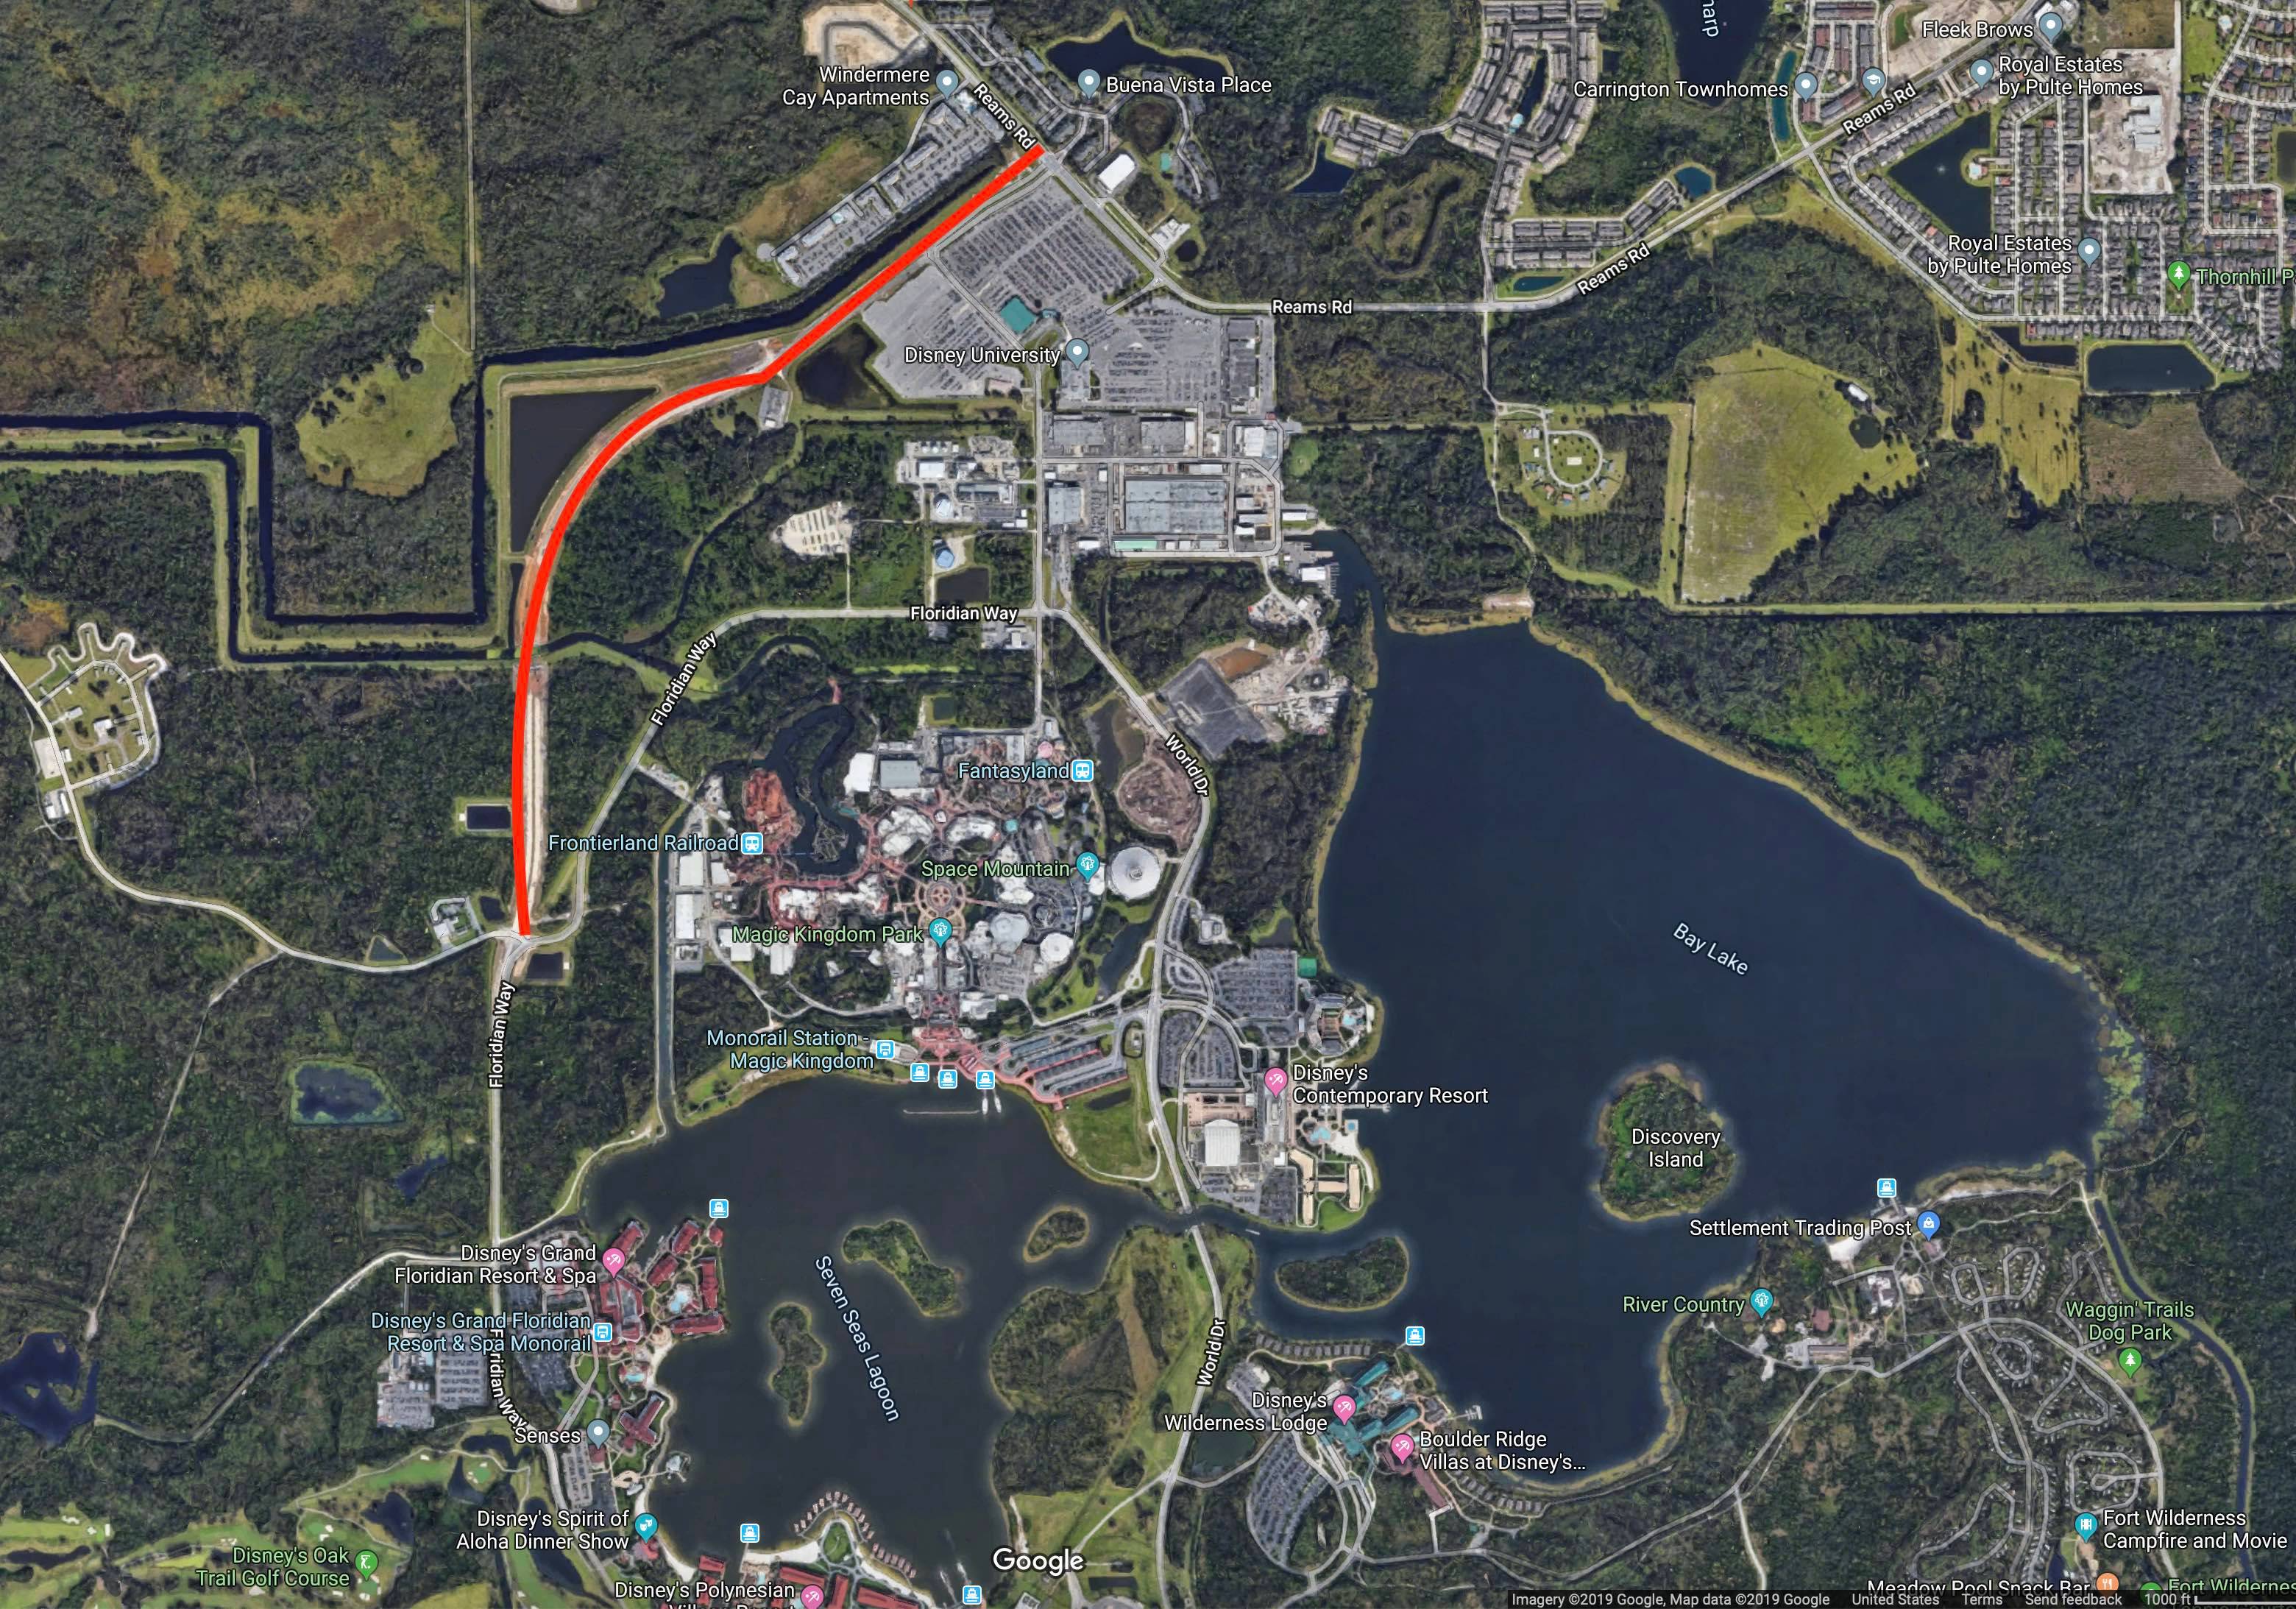 New Floridian Place northern roadway to open next week behind the Magic Kingdom